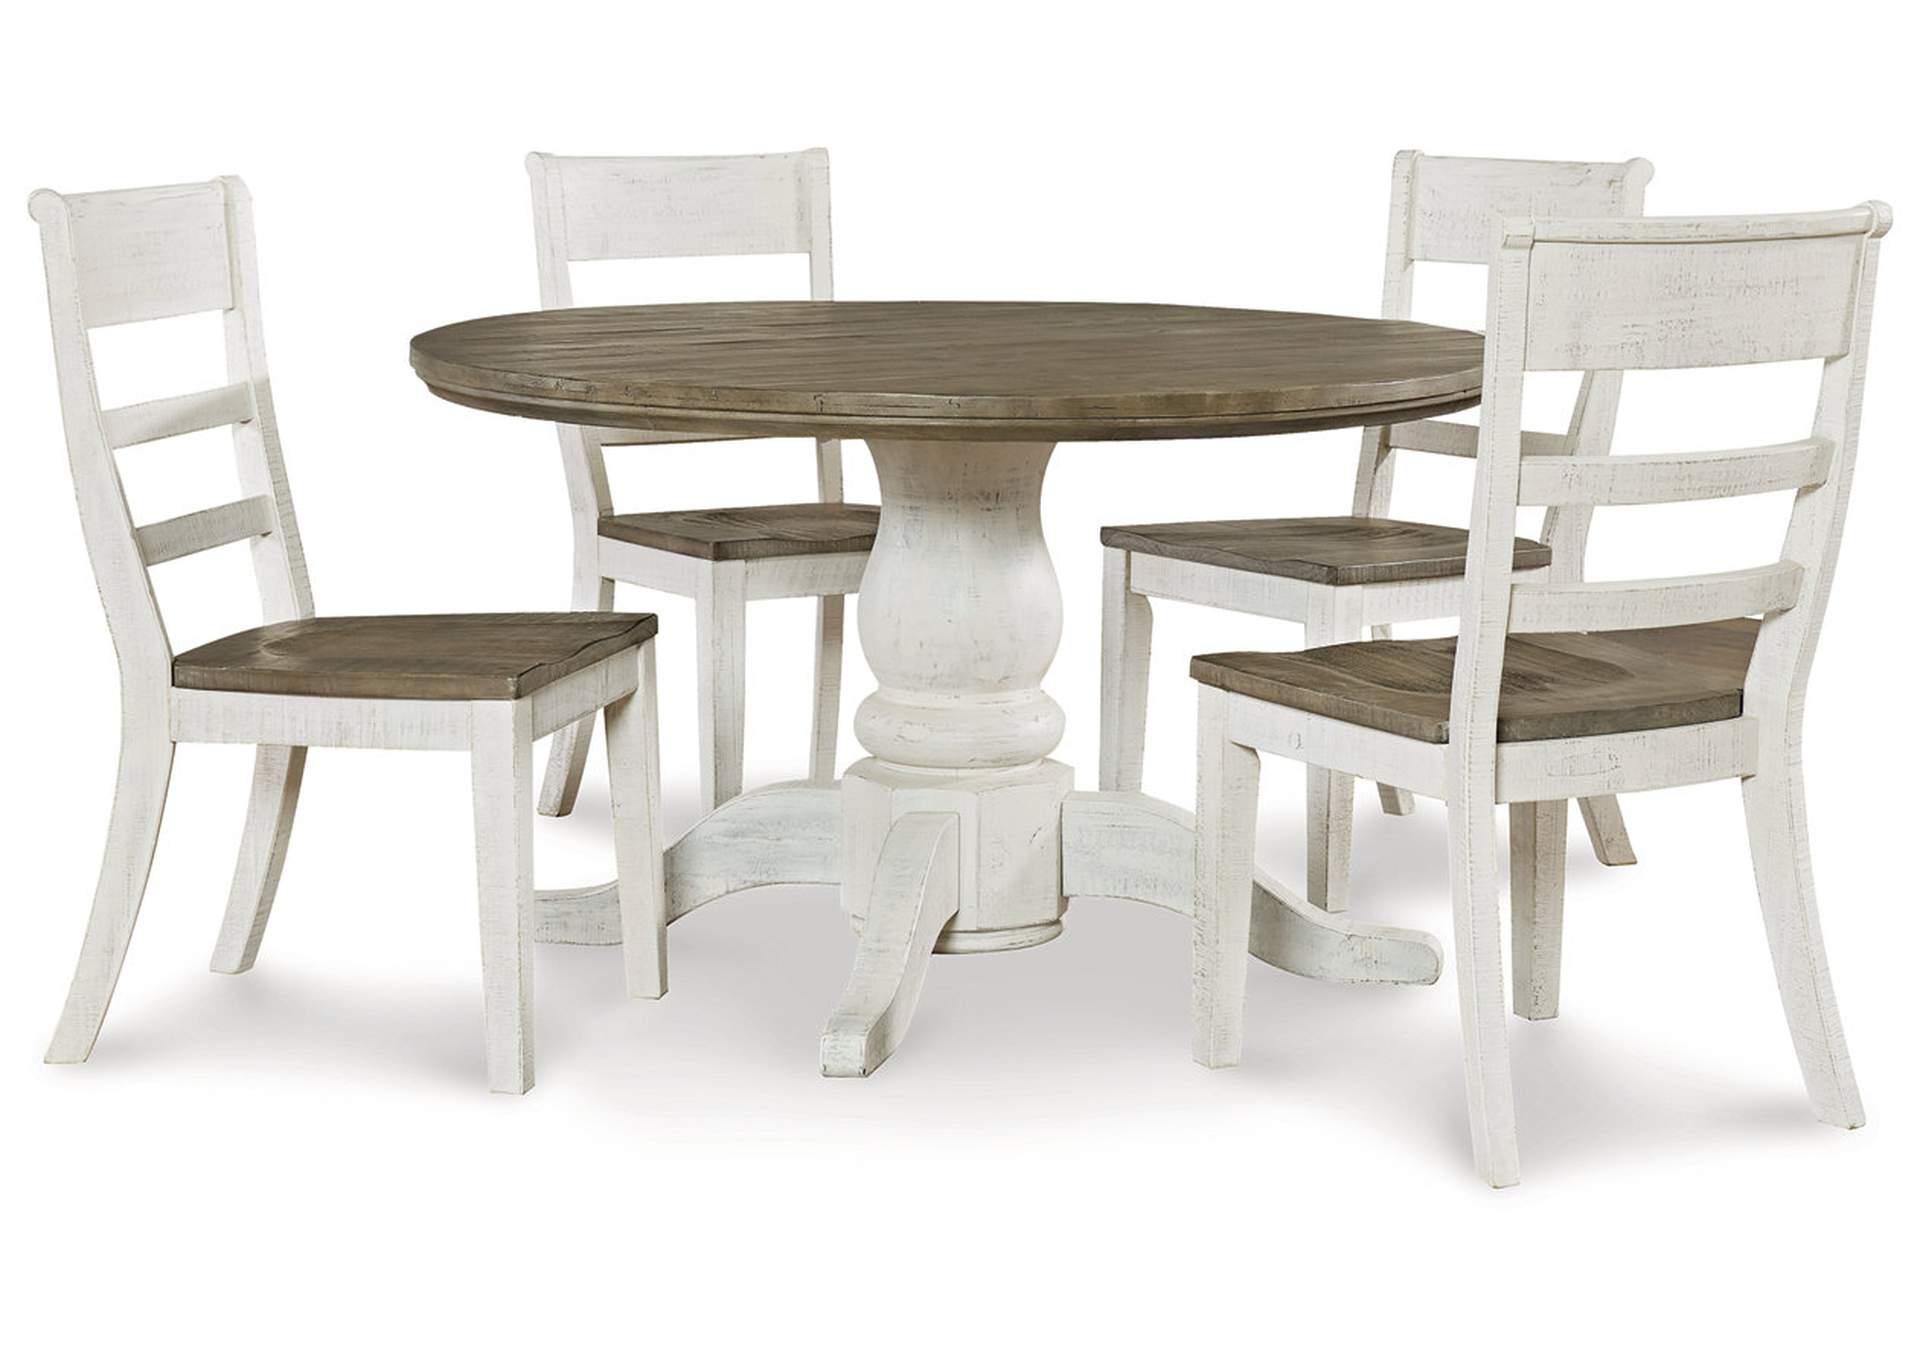 Havalance Dining Table and 4 Chairs,Millennium